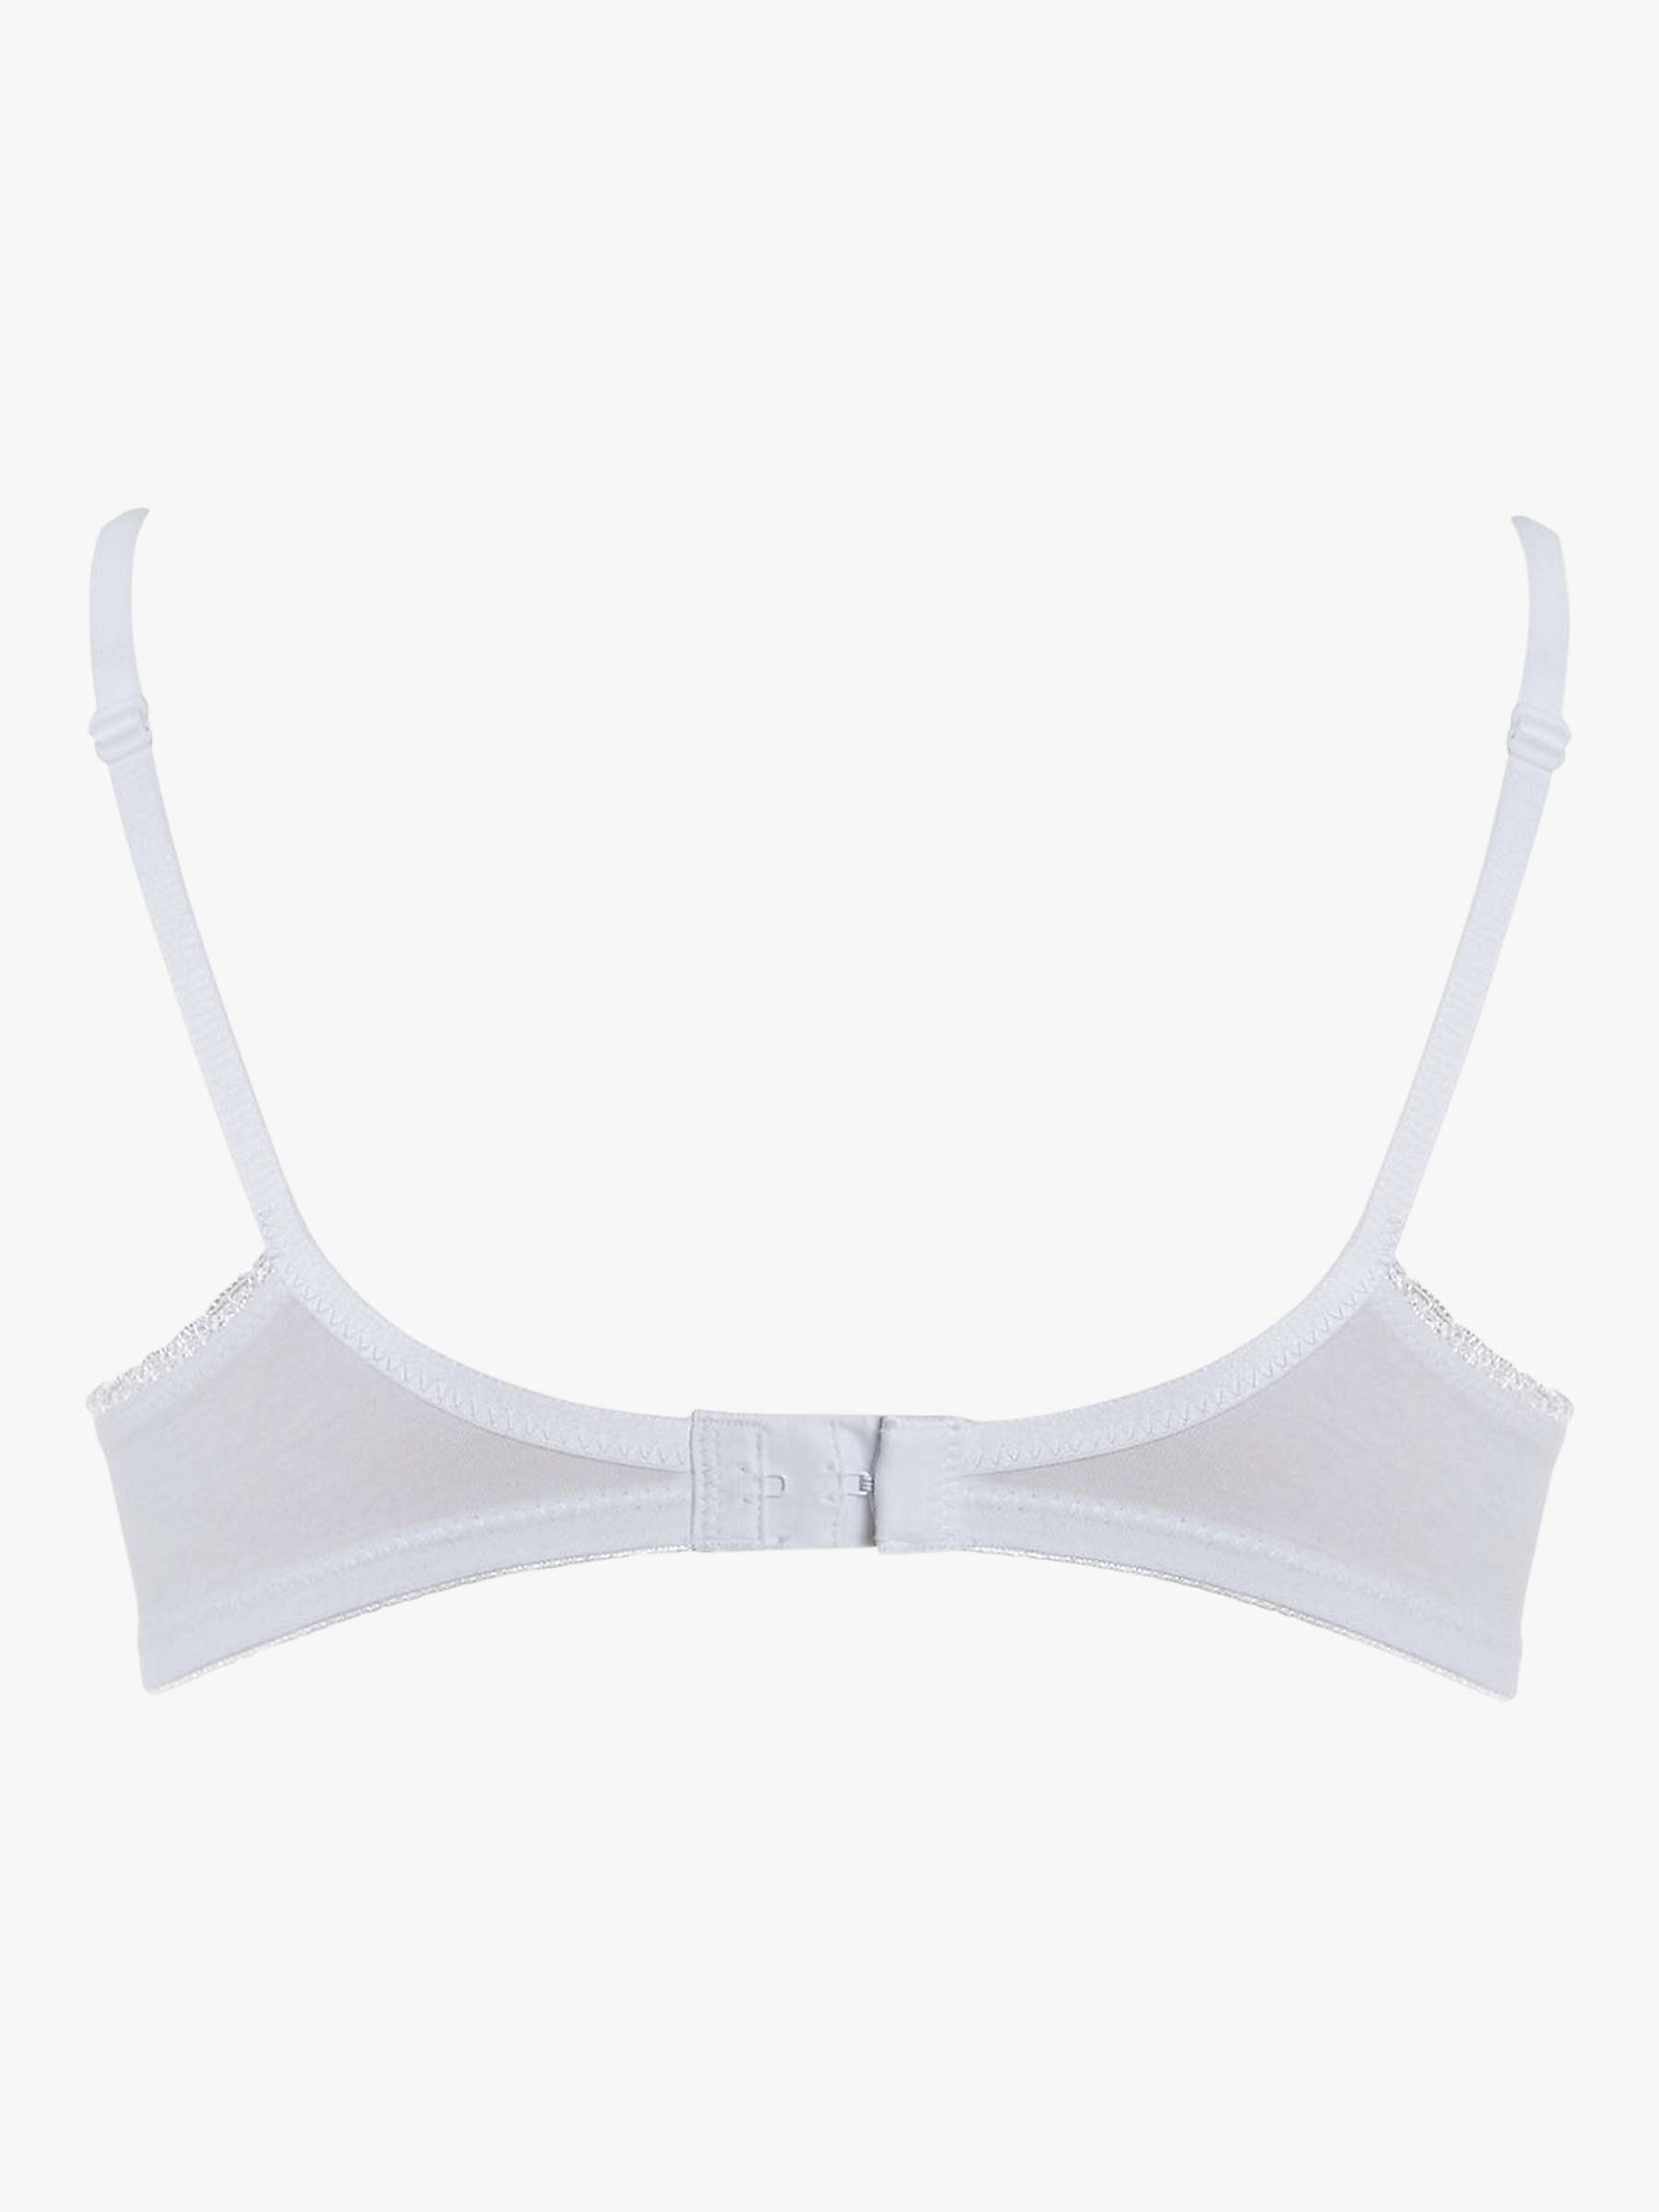 Buy Royce My First Bra, Pack Of 2, White / Pink Online at johnlewis.com